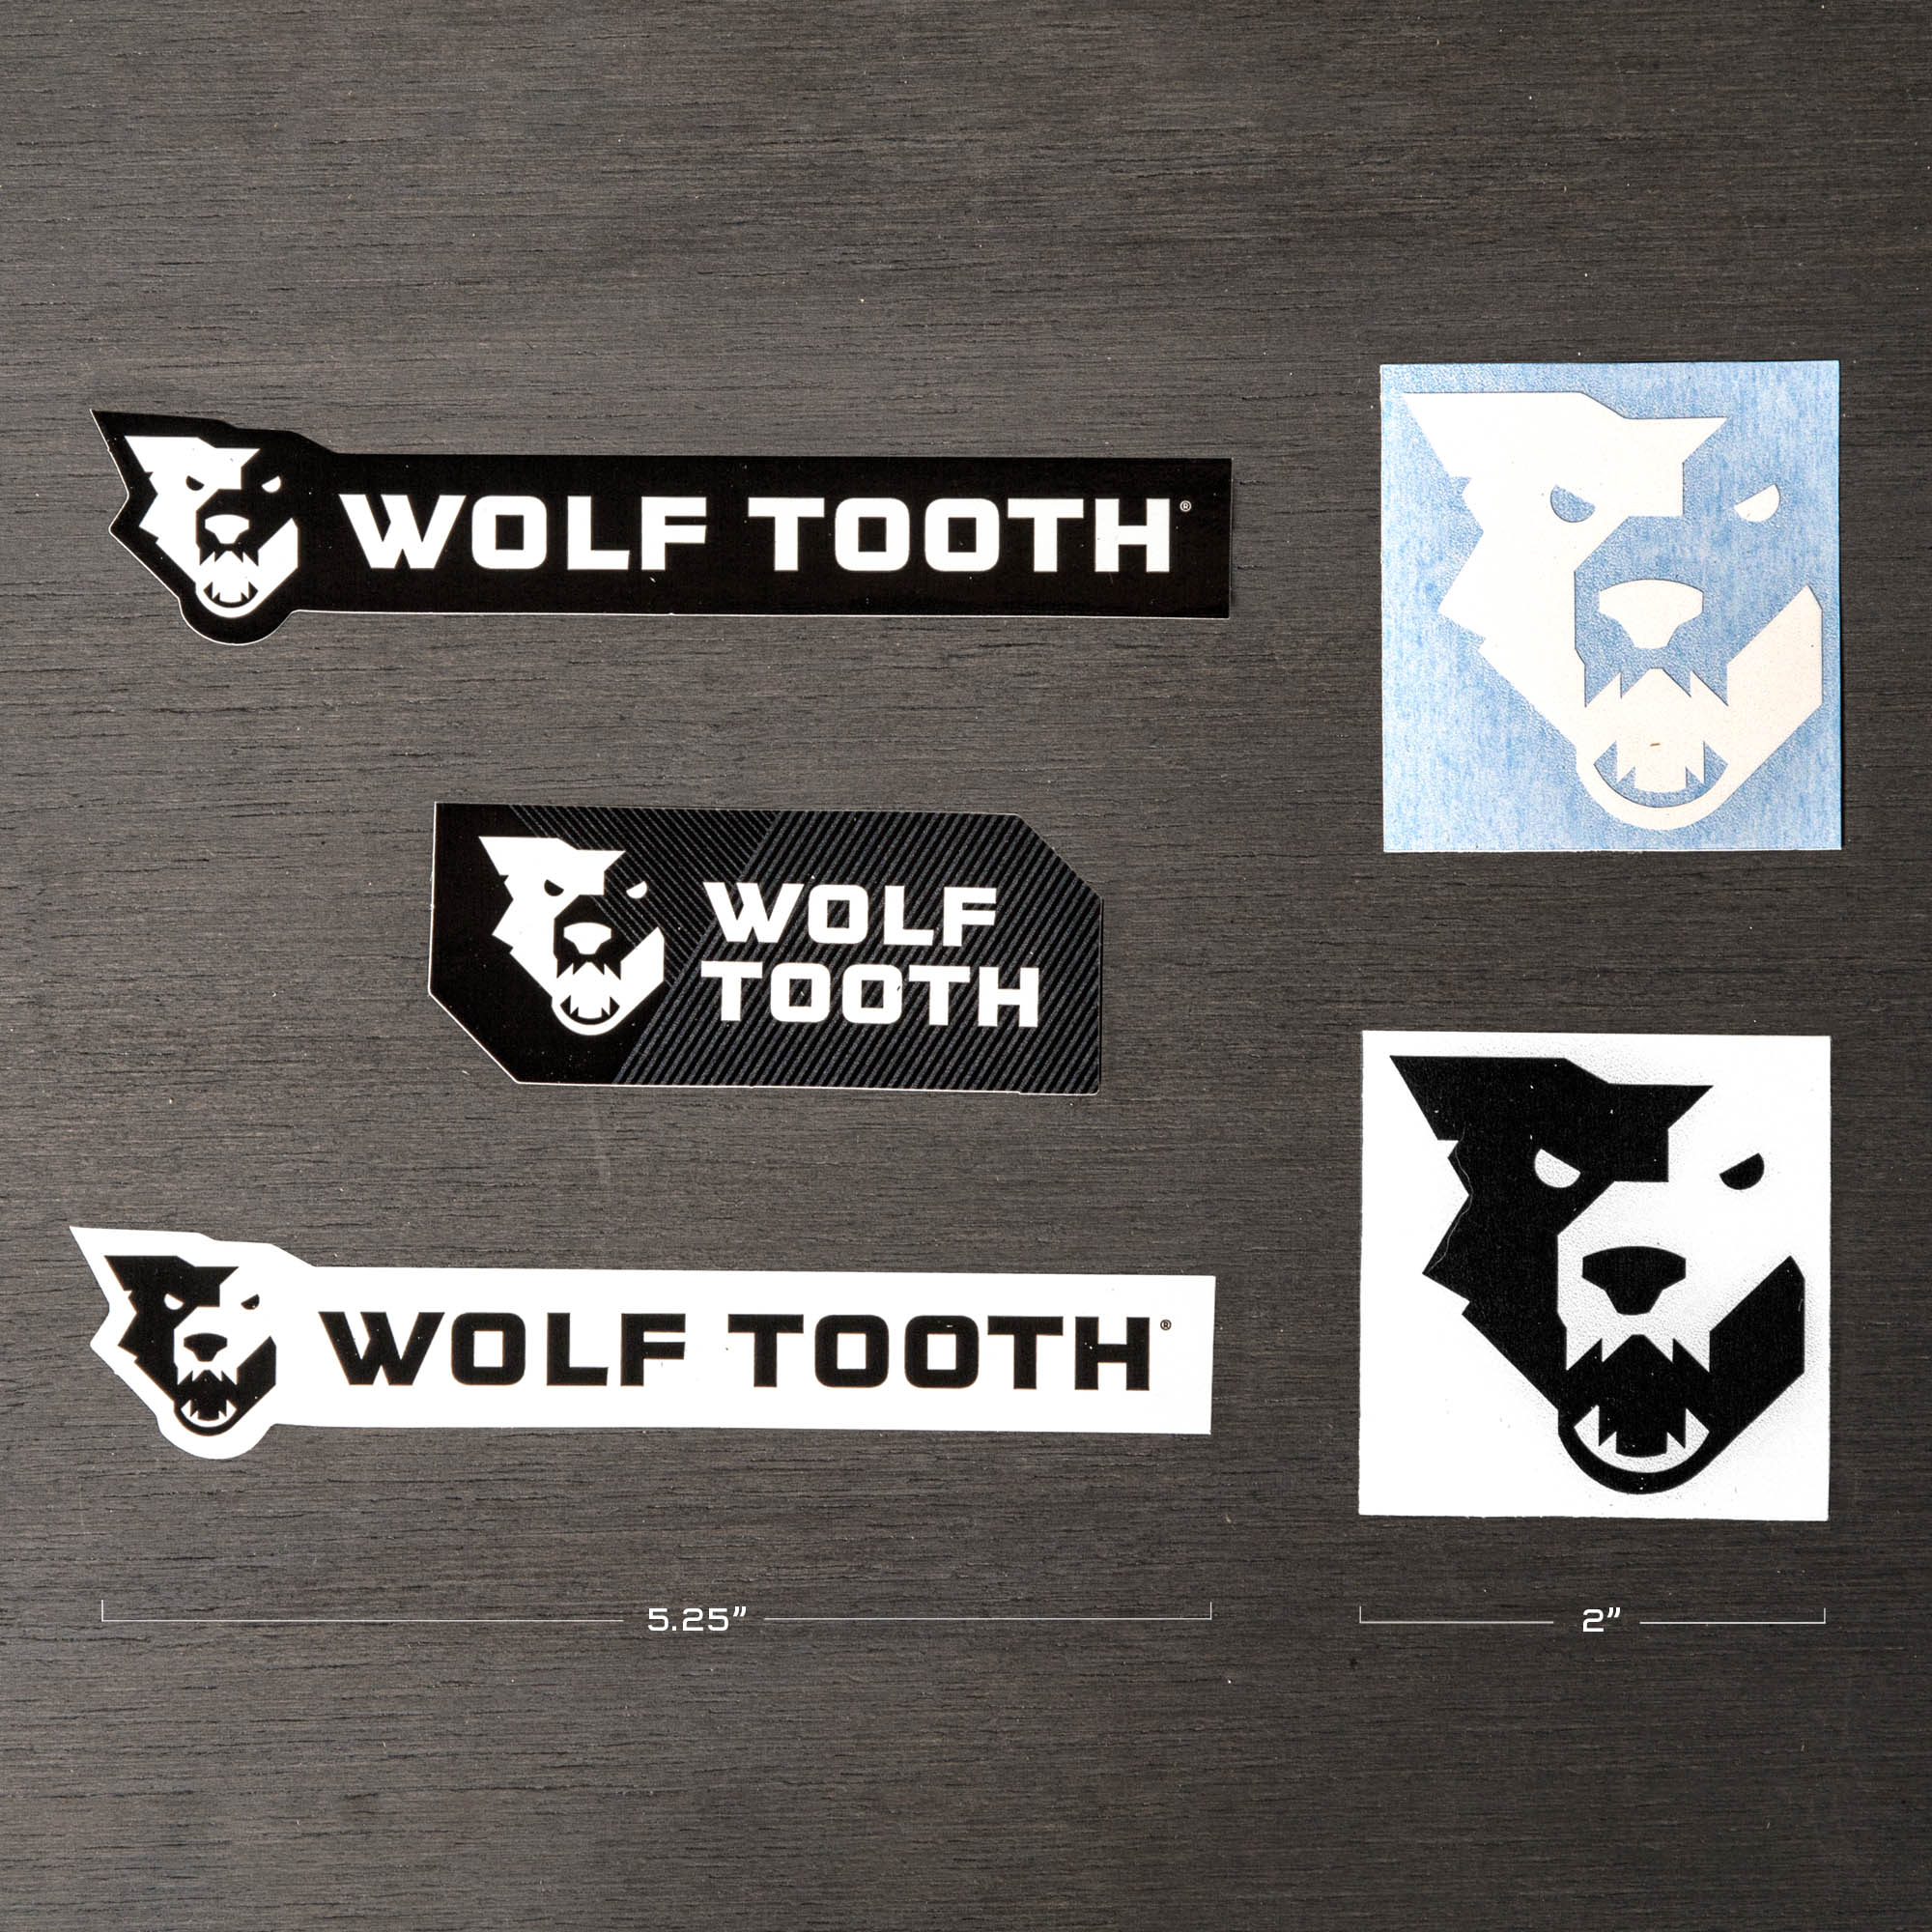 Decals / Decals Pack of 5 Wolf Tooth Decals